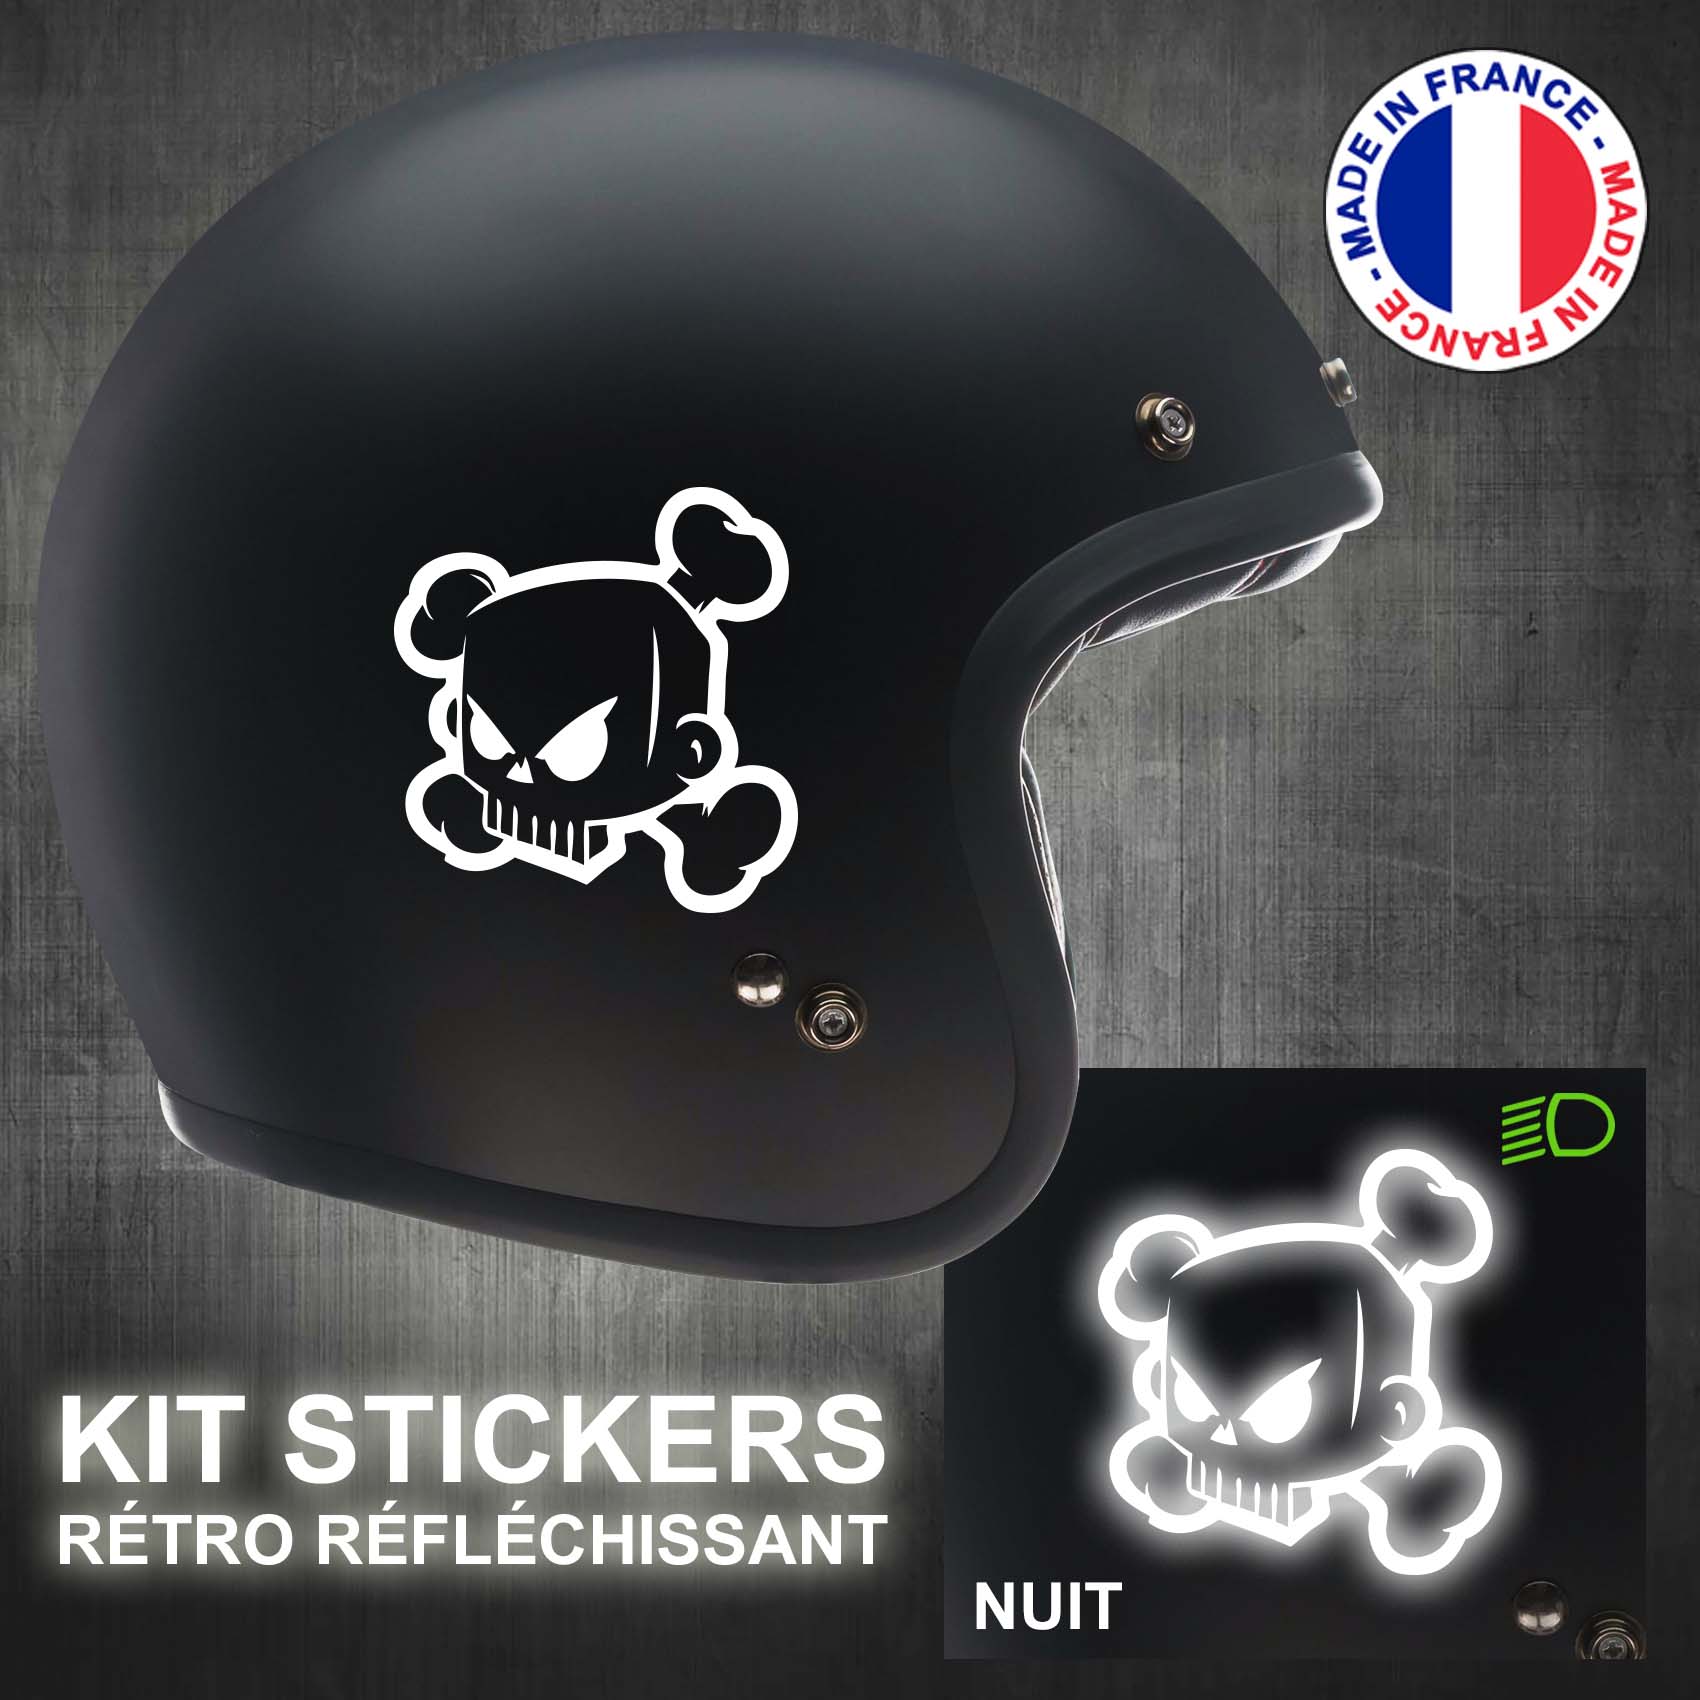 stickers-casque-moto-dc-shoes-ken-block-ref1-retro-reflechissant-autocollant-noir-moto-velo-tuning-racing-route-sticker-casques-adhesif-scooter-nuit-securite-decals-personnalise-perso